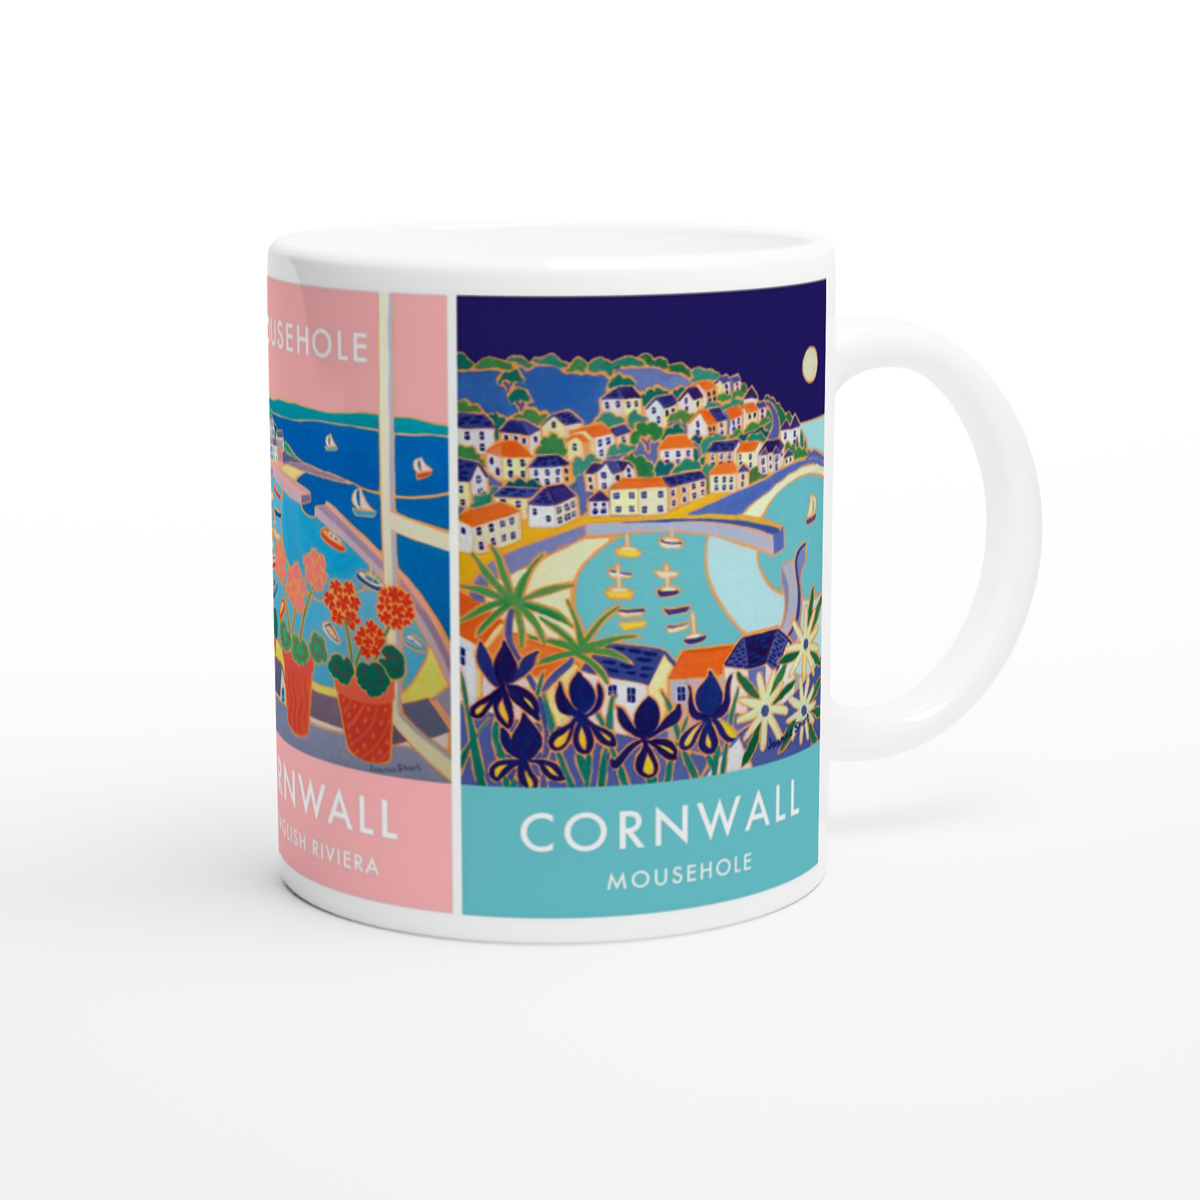 Joanne Short Ceramic Cornish Art Mug featuring St Ives and Mousehole on the Penwith Peninsula in Cornwall